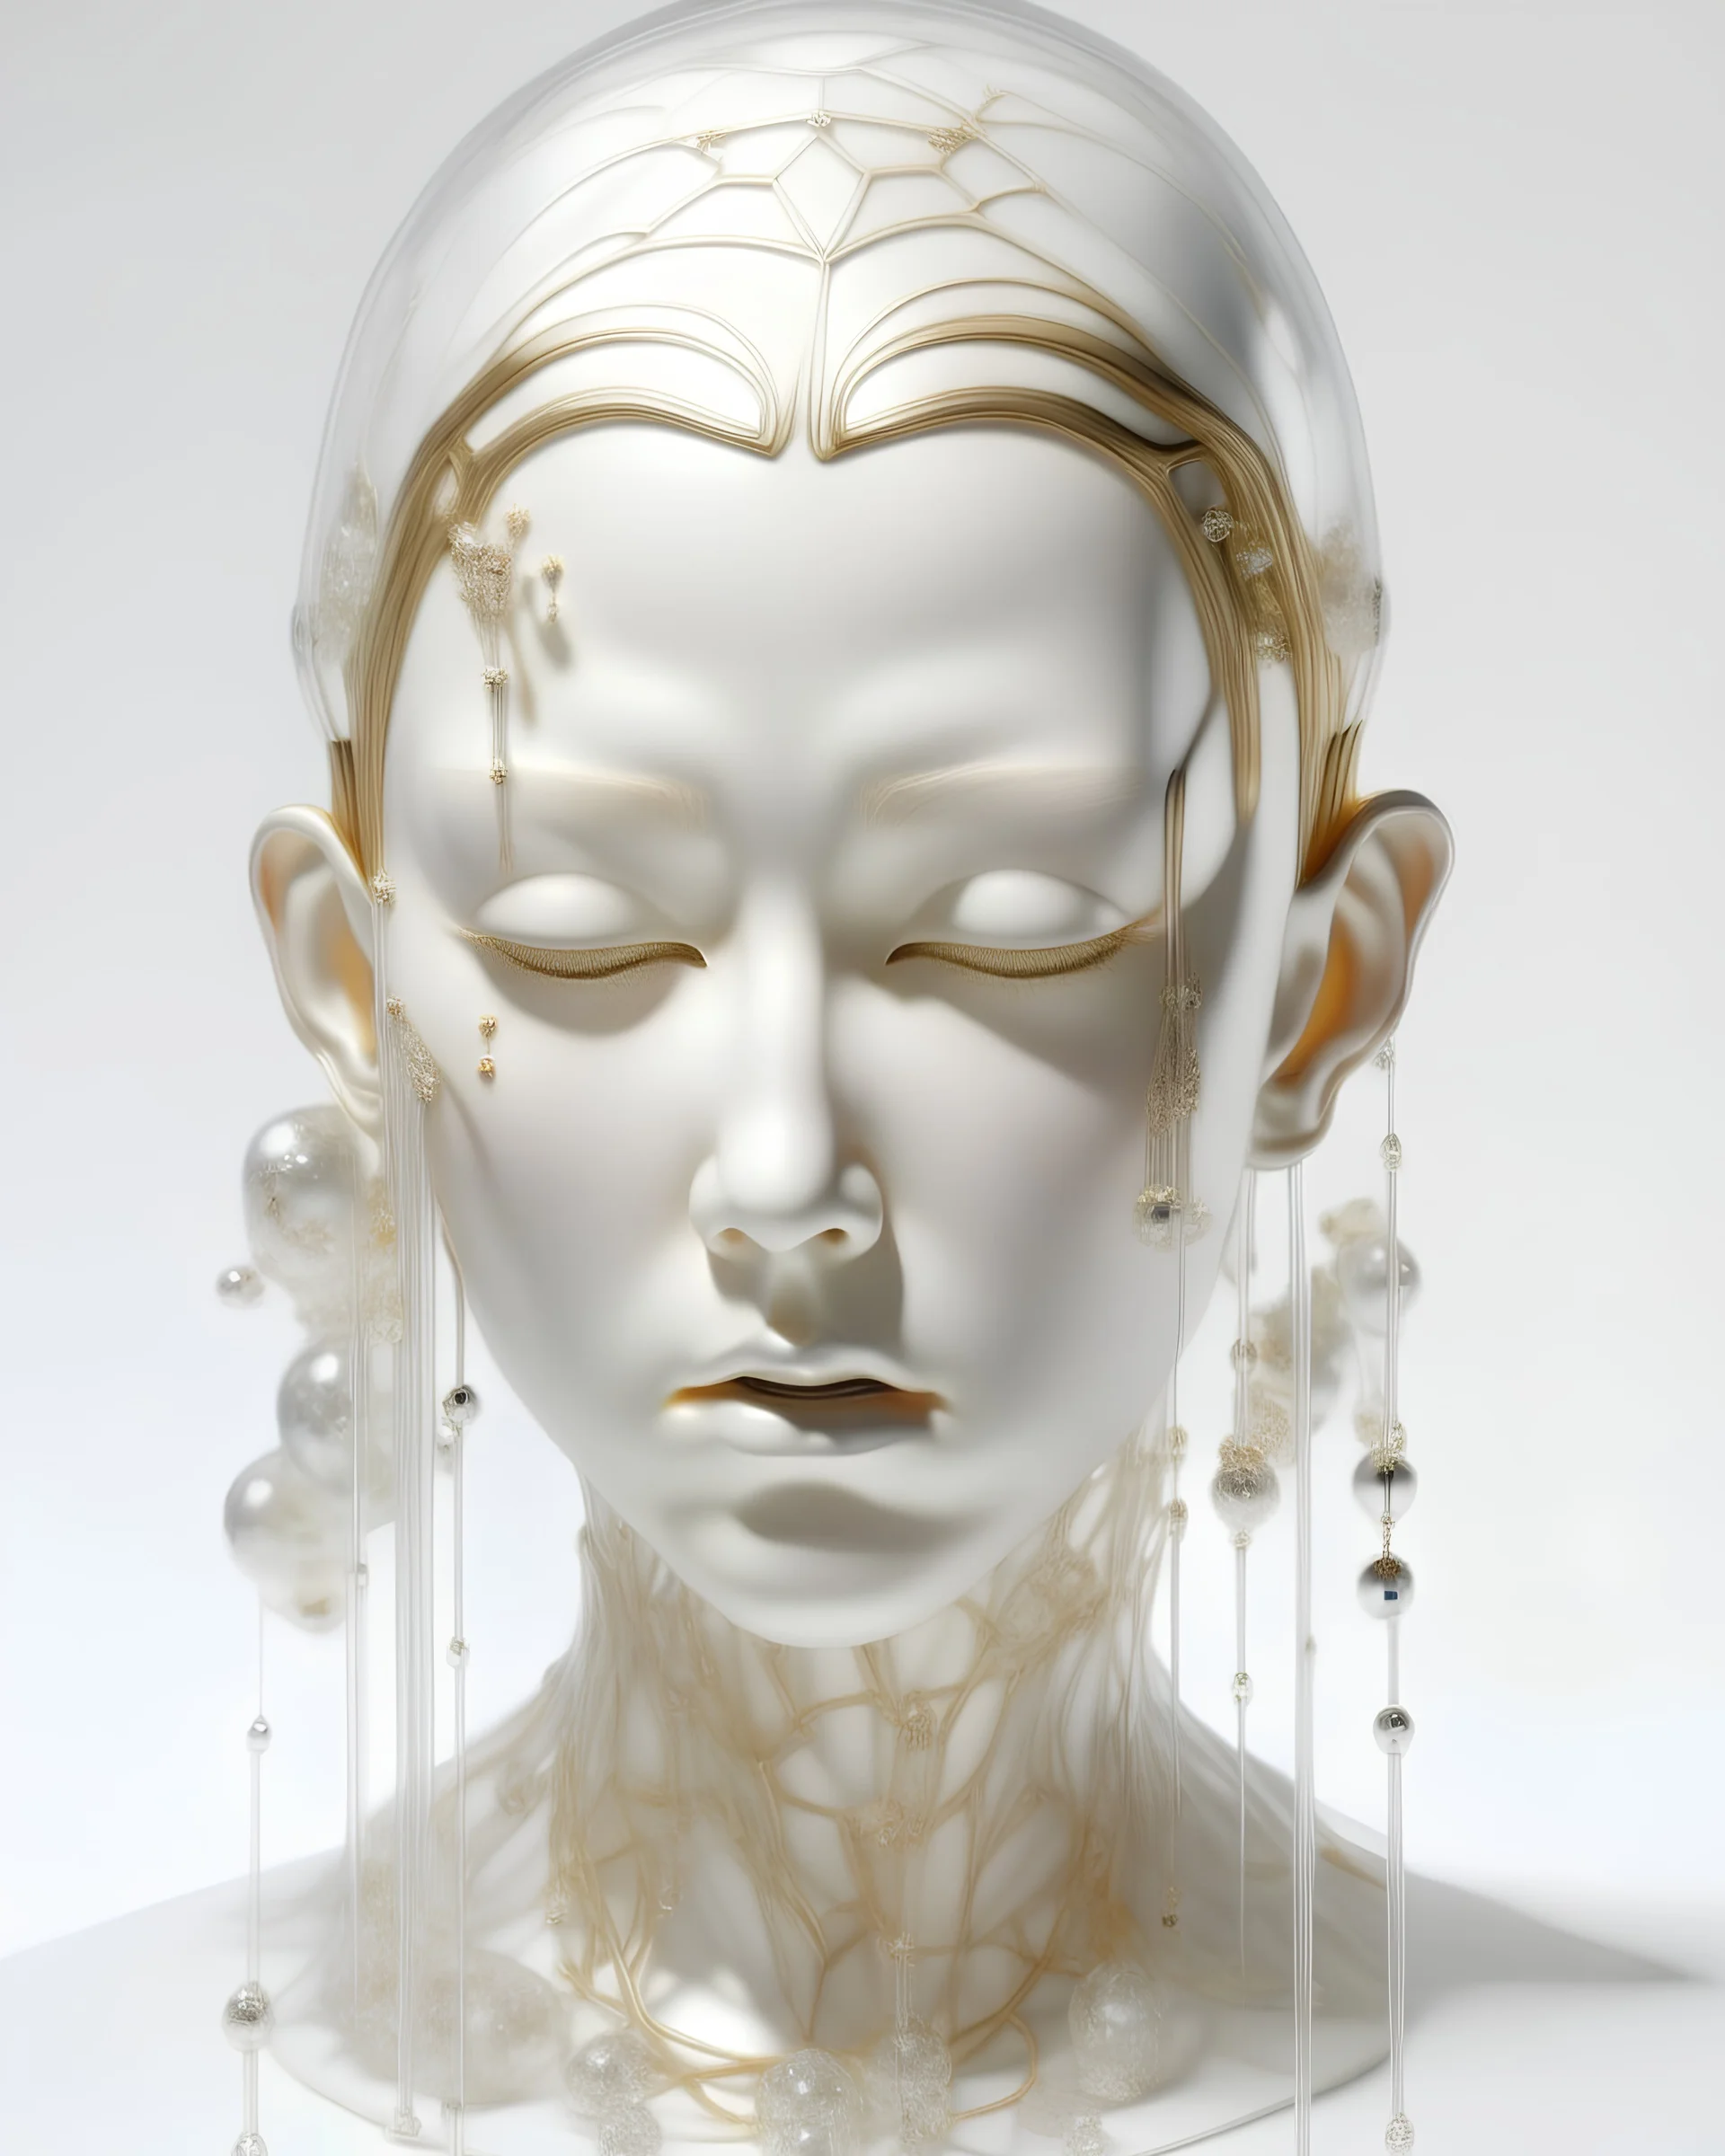 the piece shows the sad facial expressions of a female humanoid, 3 transparent tubes in the background, in the style of glass-like sculpture, jocelyn hobbie, glitter and crystals on the top of the head, delicate constructions, light white, creamy white background, exquisite detail